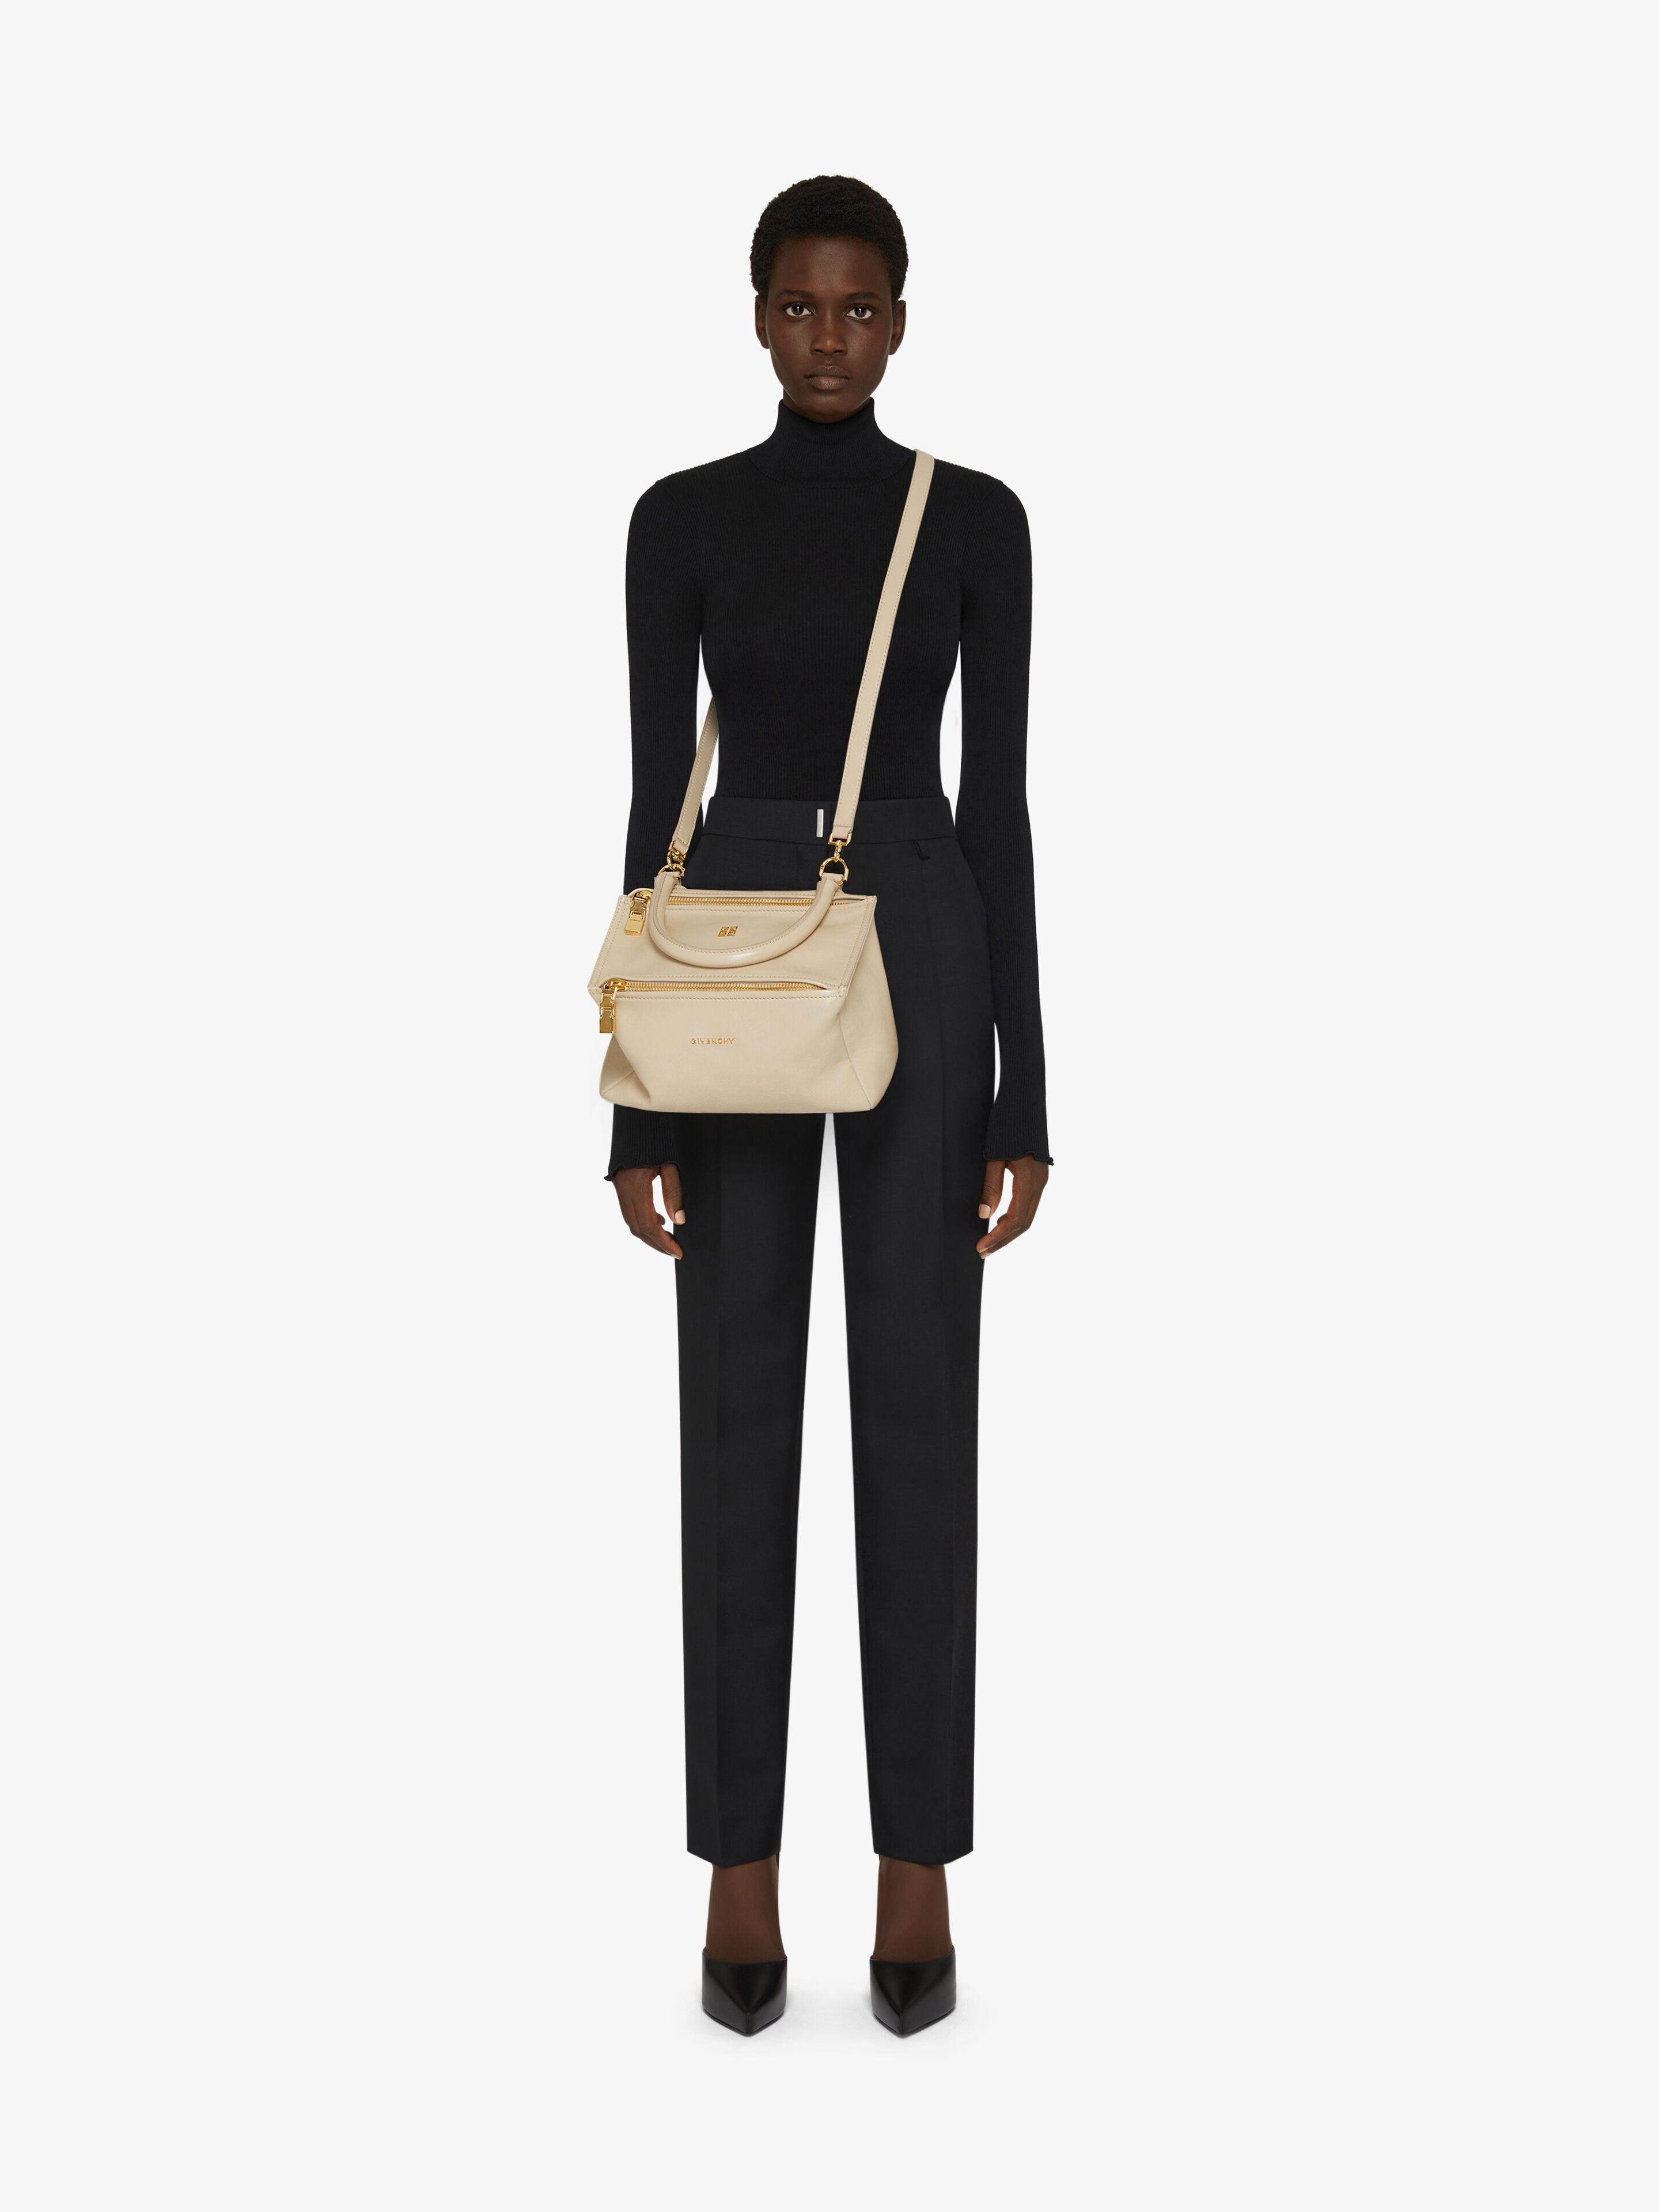 Shop Givenchy Mini Pandora Bag In Grained Leather